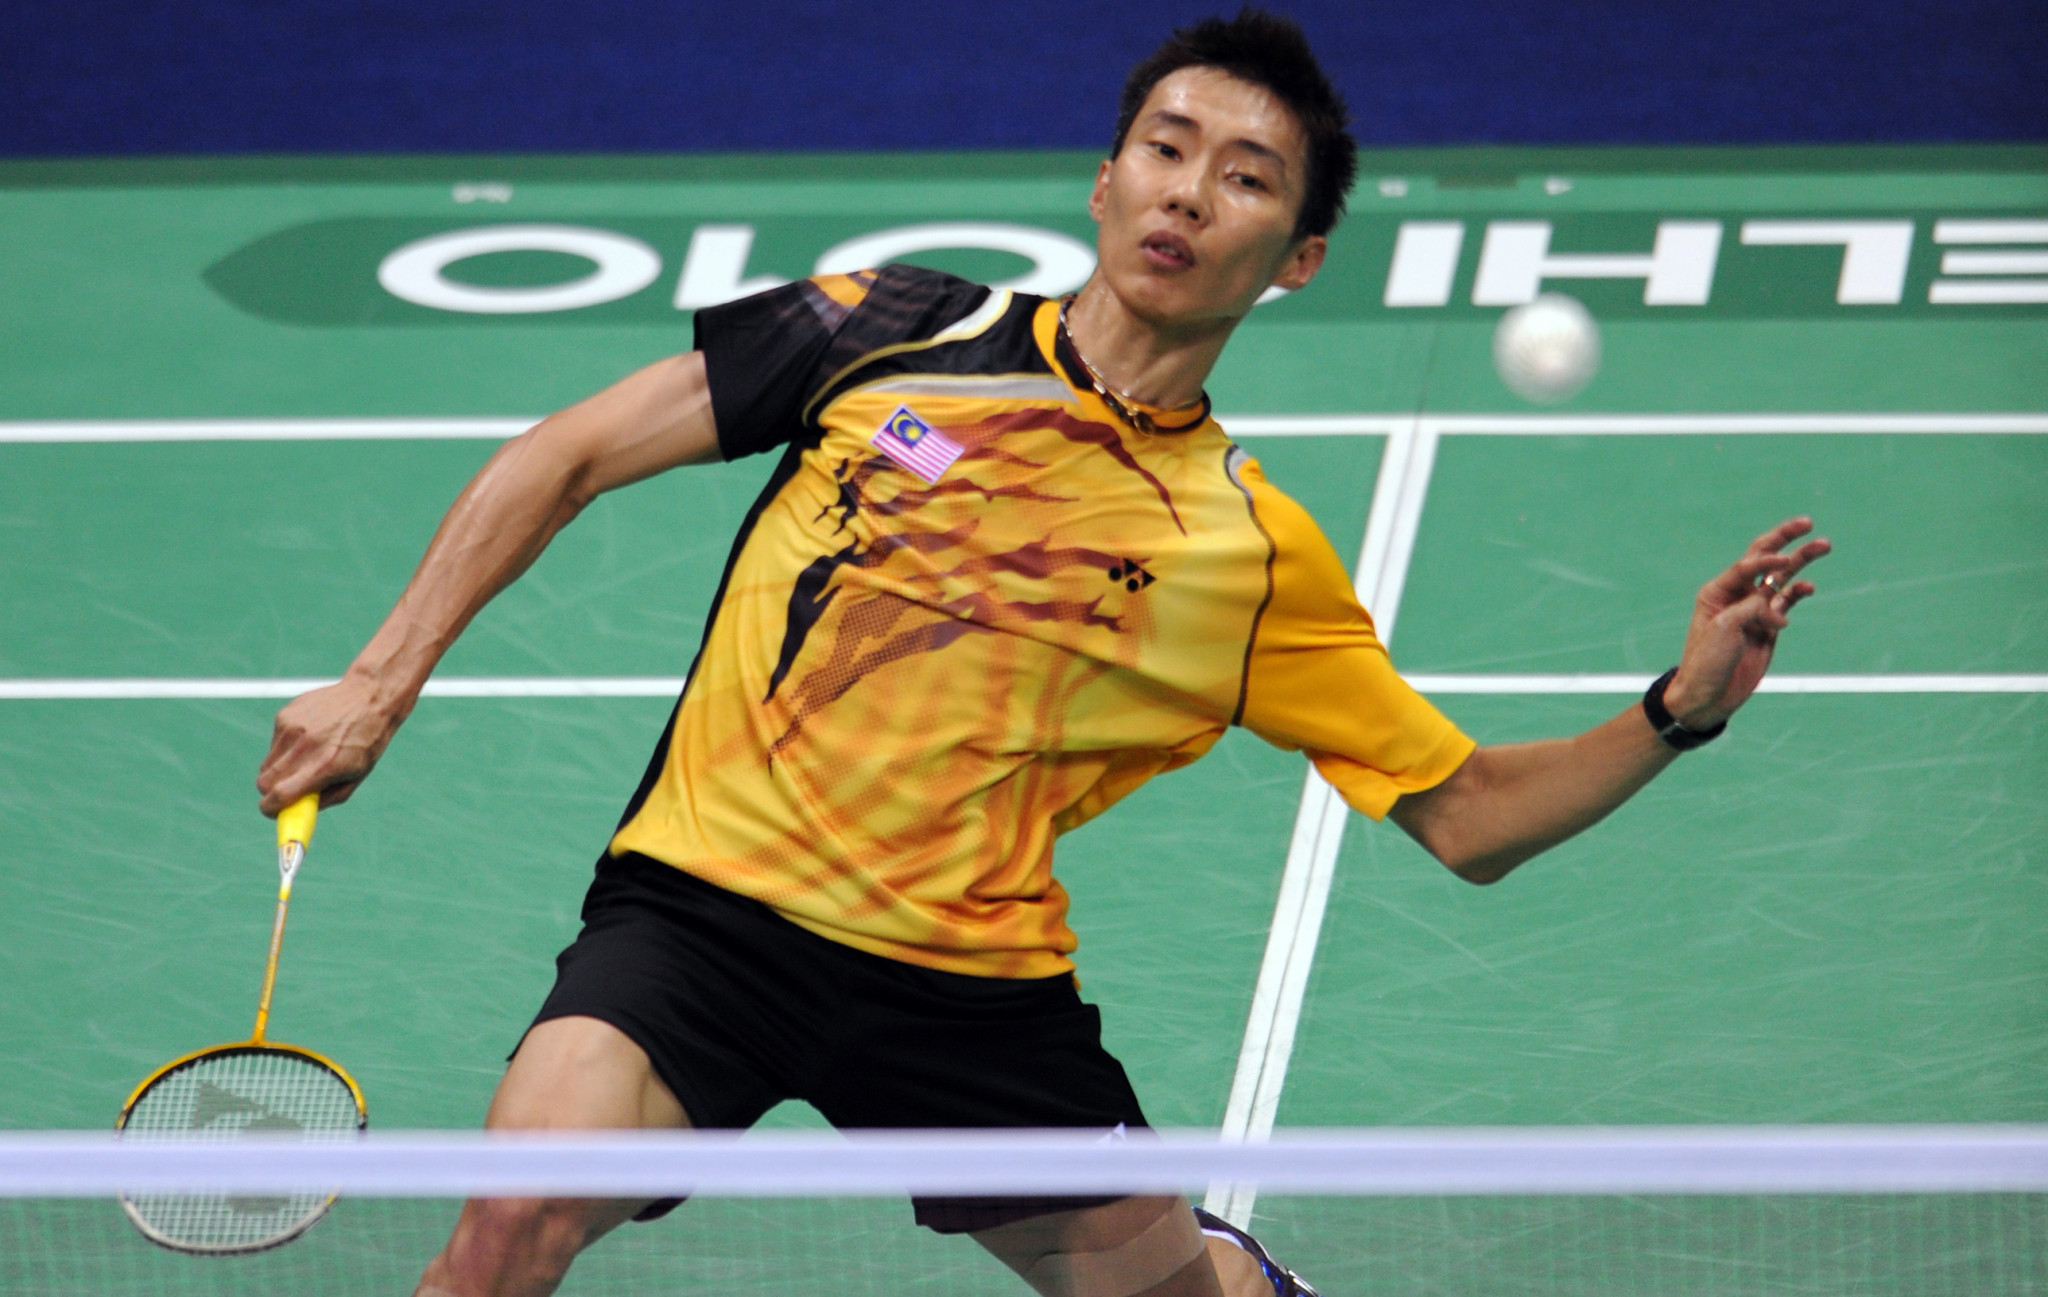 Lee Chong Wei won the men's singles title at Melbourne 2006 and Dehli 2010 ©Getty Images